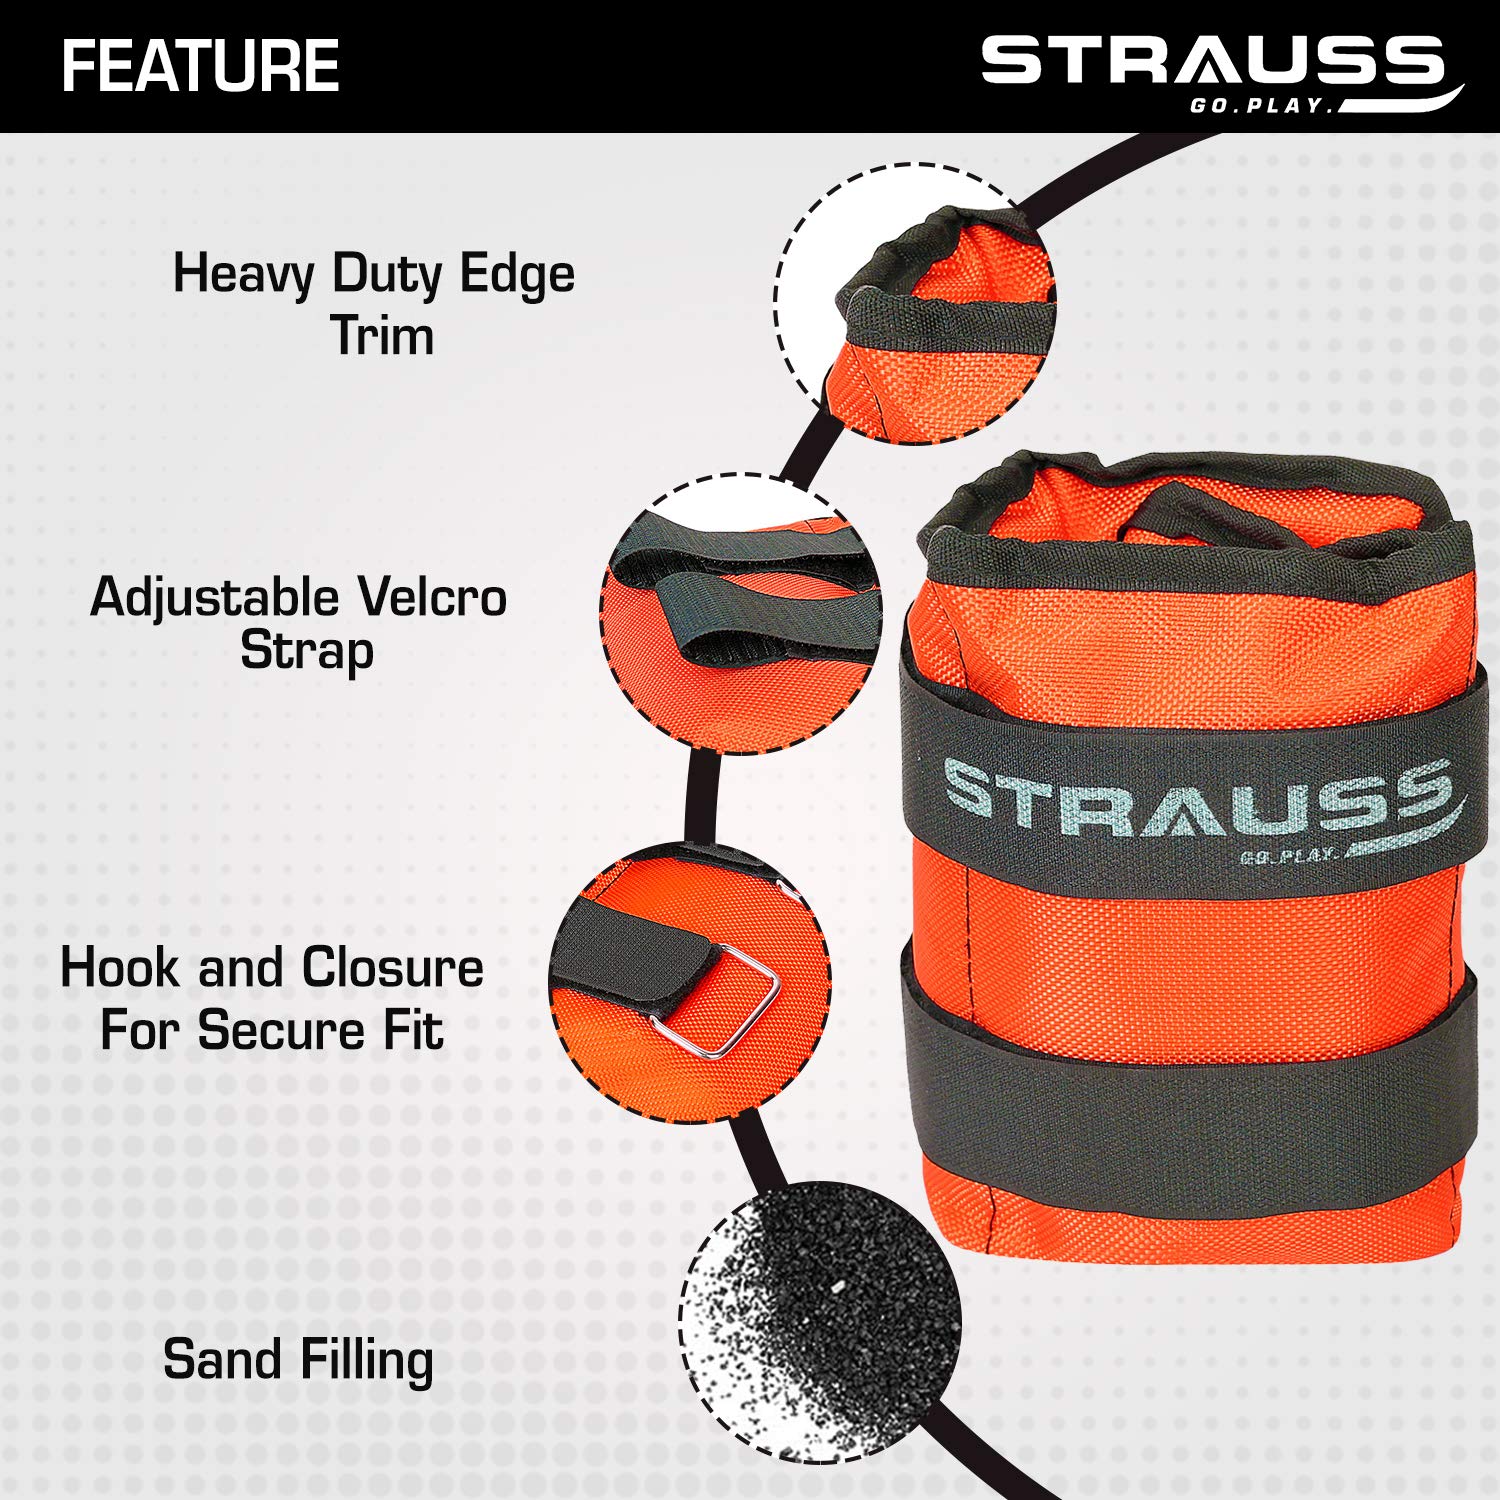 Strauss Adjustable Ankle/Wrist Weights 5 KG X 2 | Ideal for Walking, Running, Jogging, Cycling, Gym, Workout & Strength Training | Easy to Use on Ankle, Wrist, Leg, (Orange)